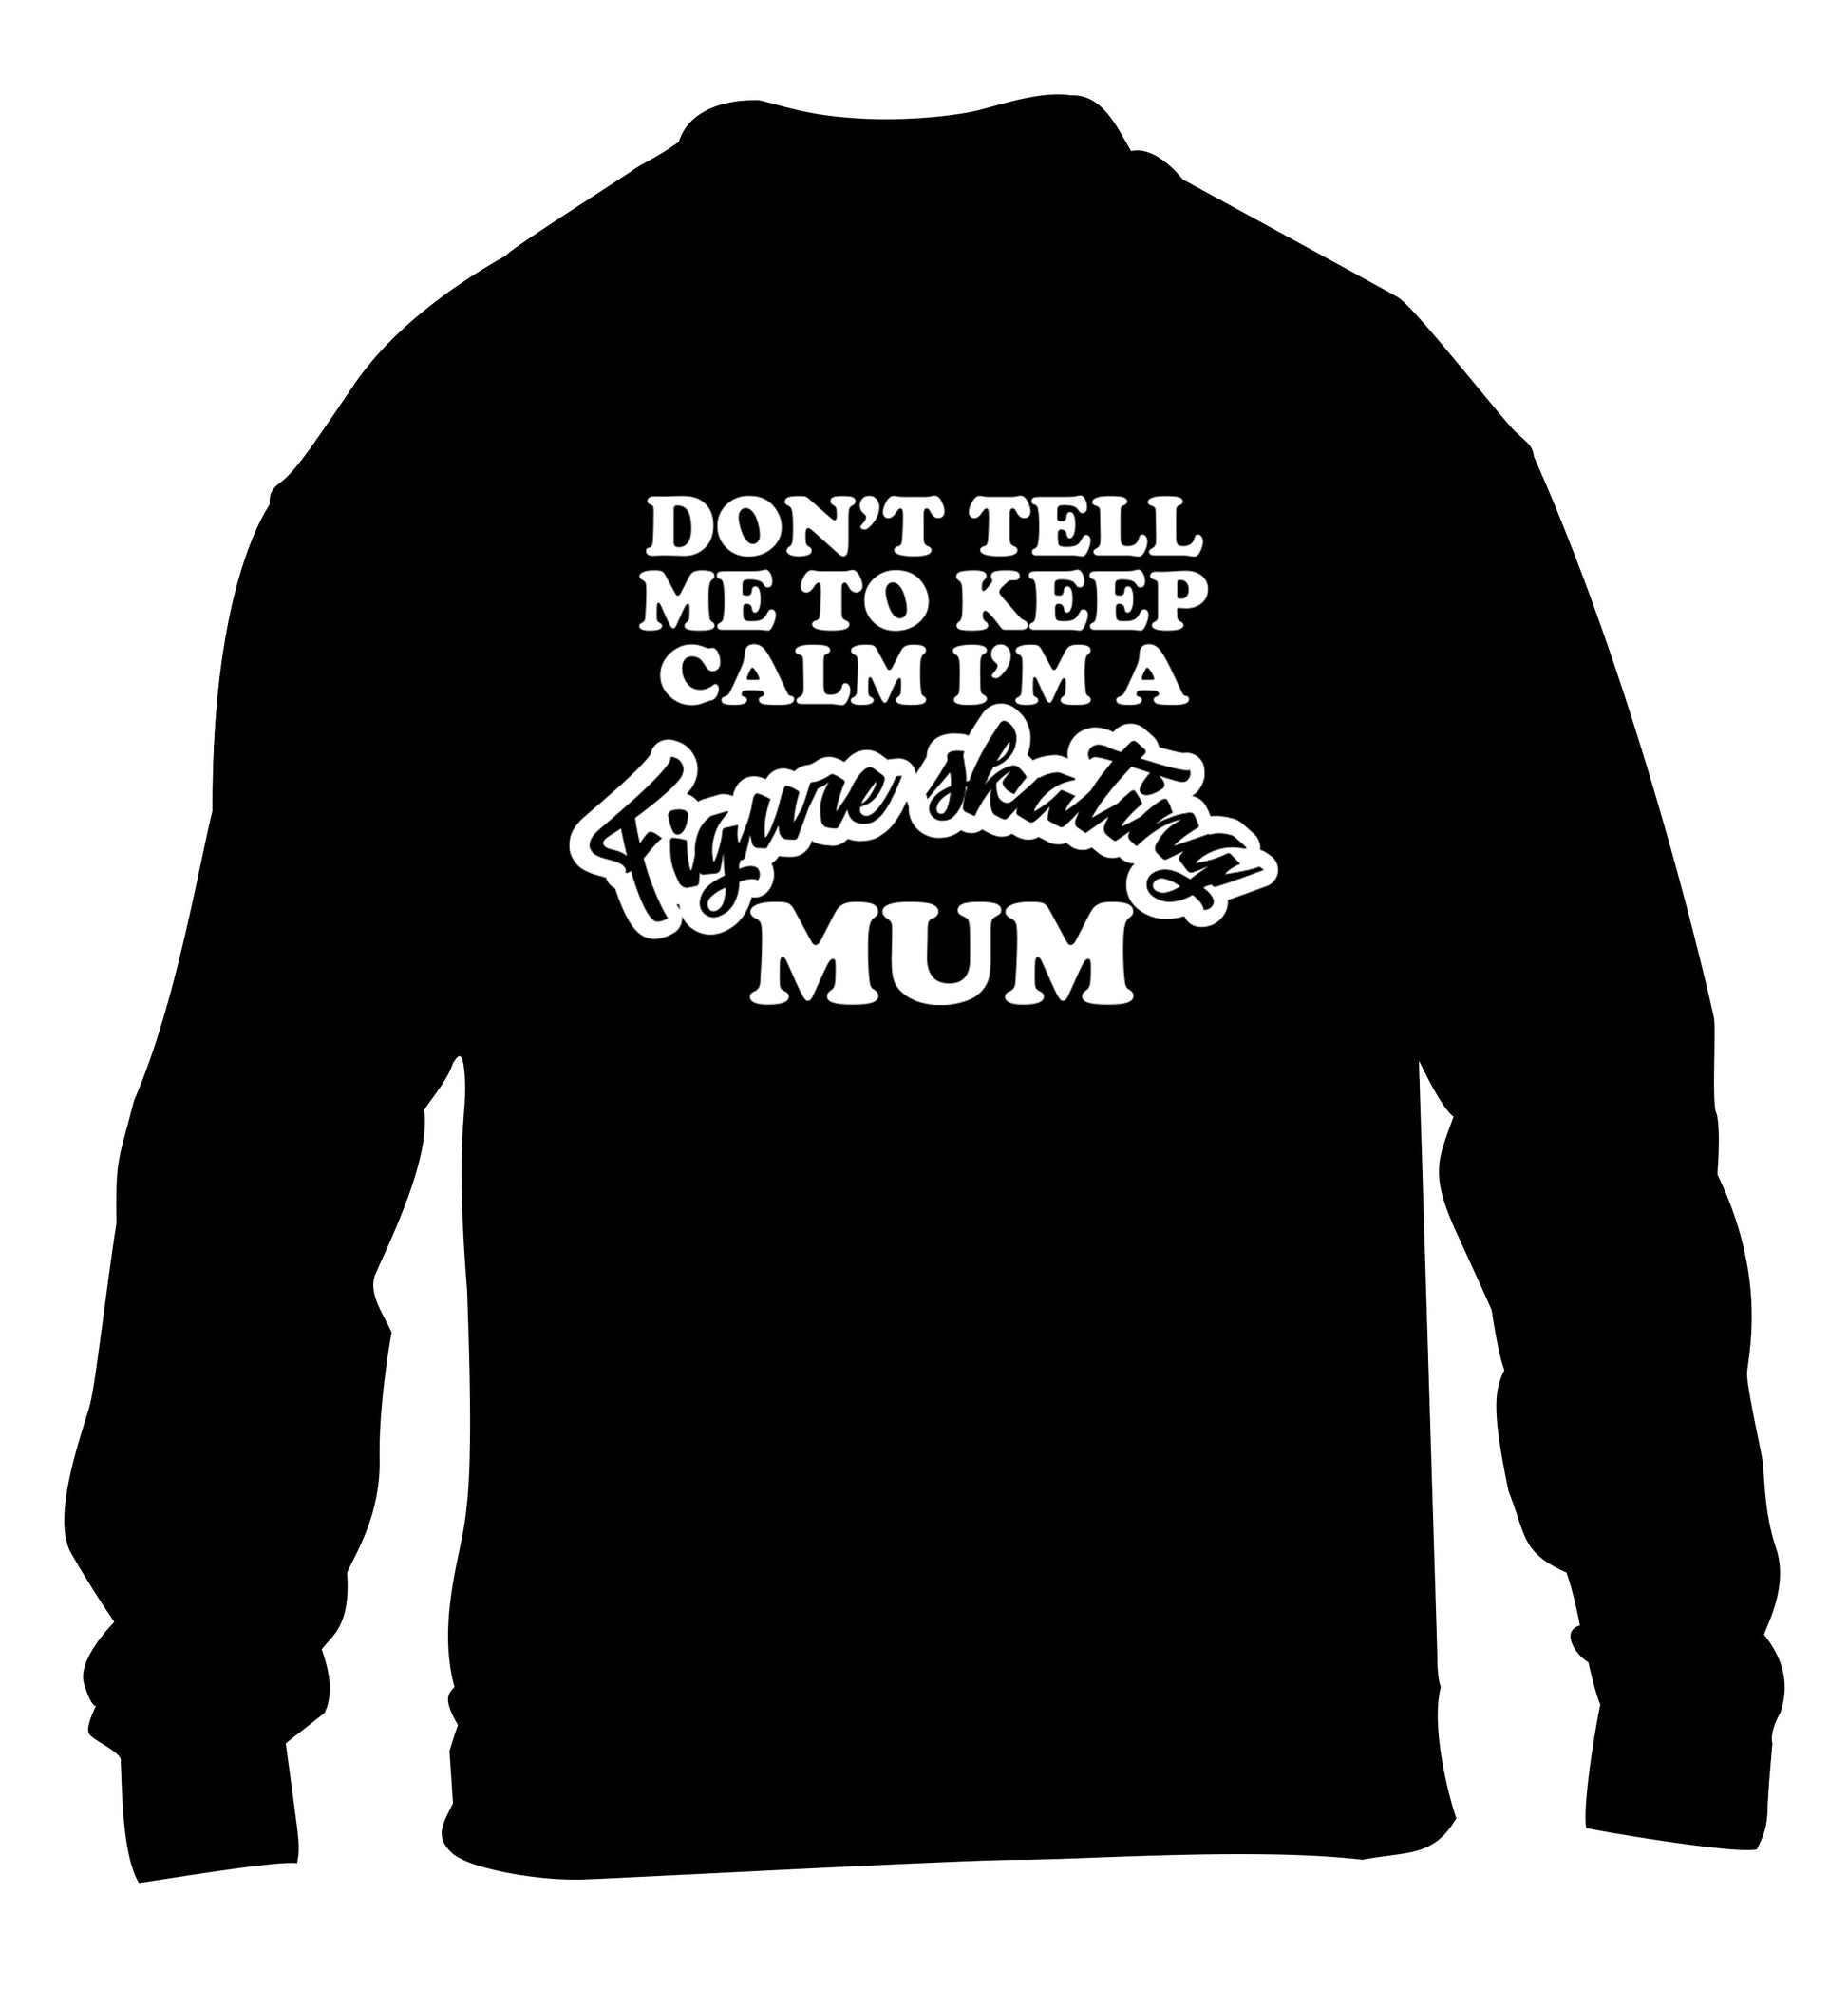 Don't tell me to keep calm I'm a figure skating mum children's black sweater 12-14 Years